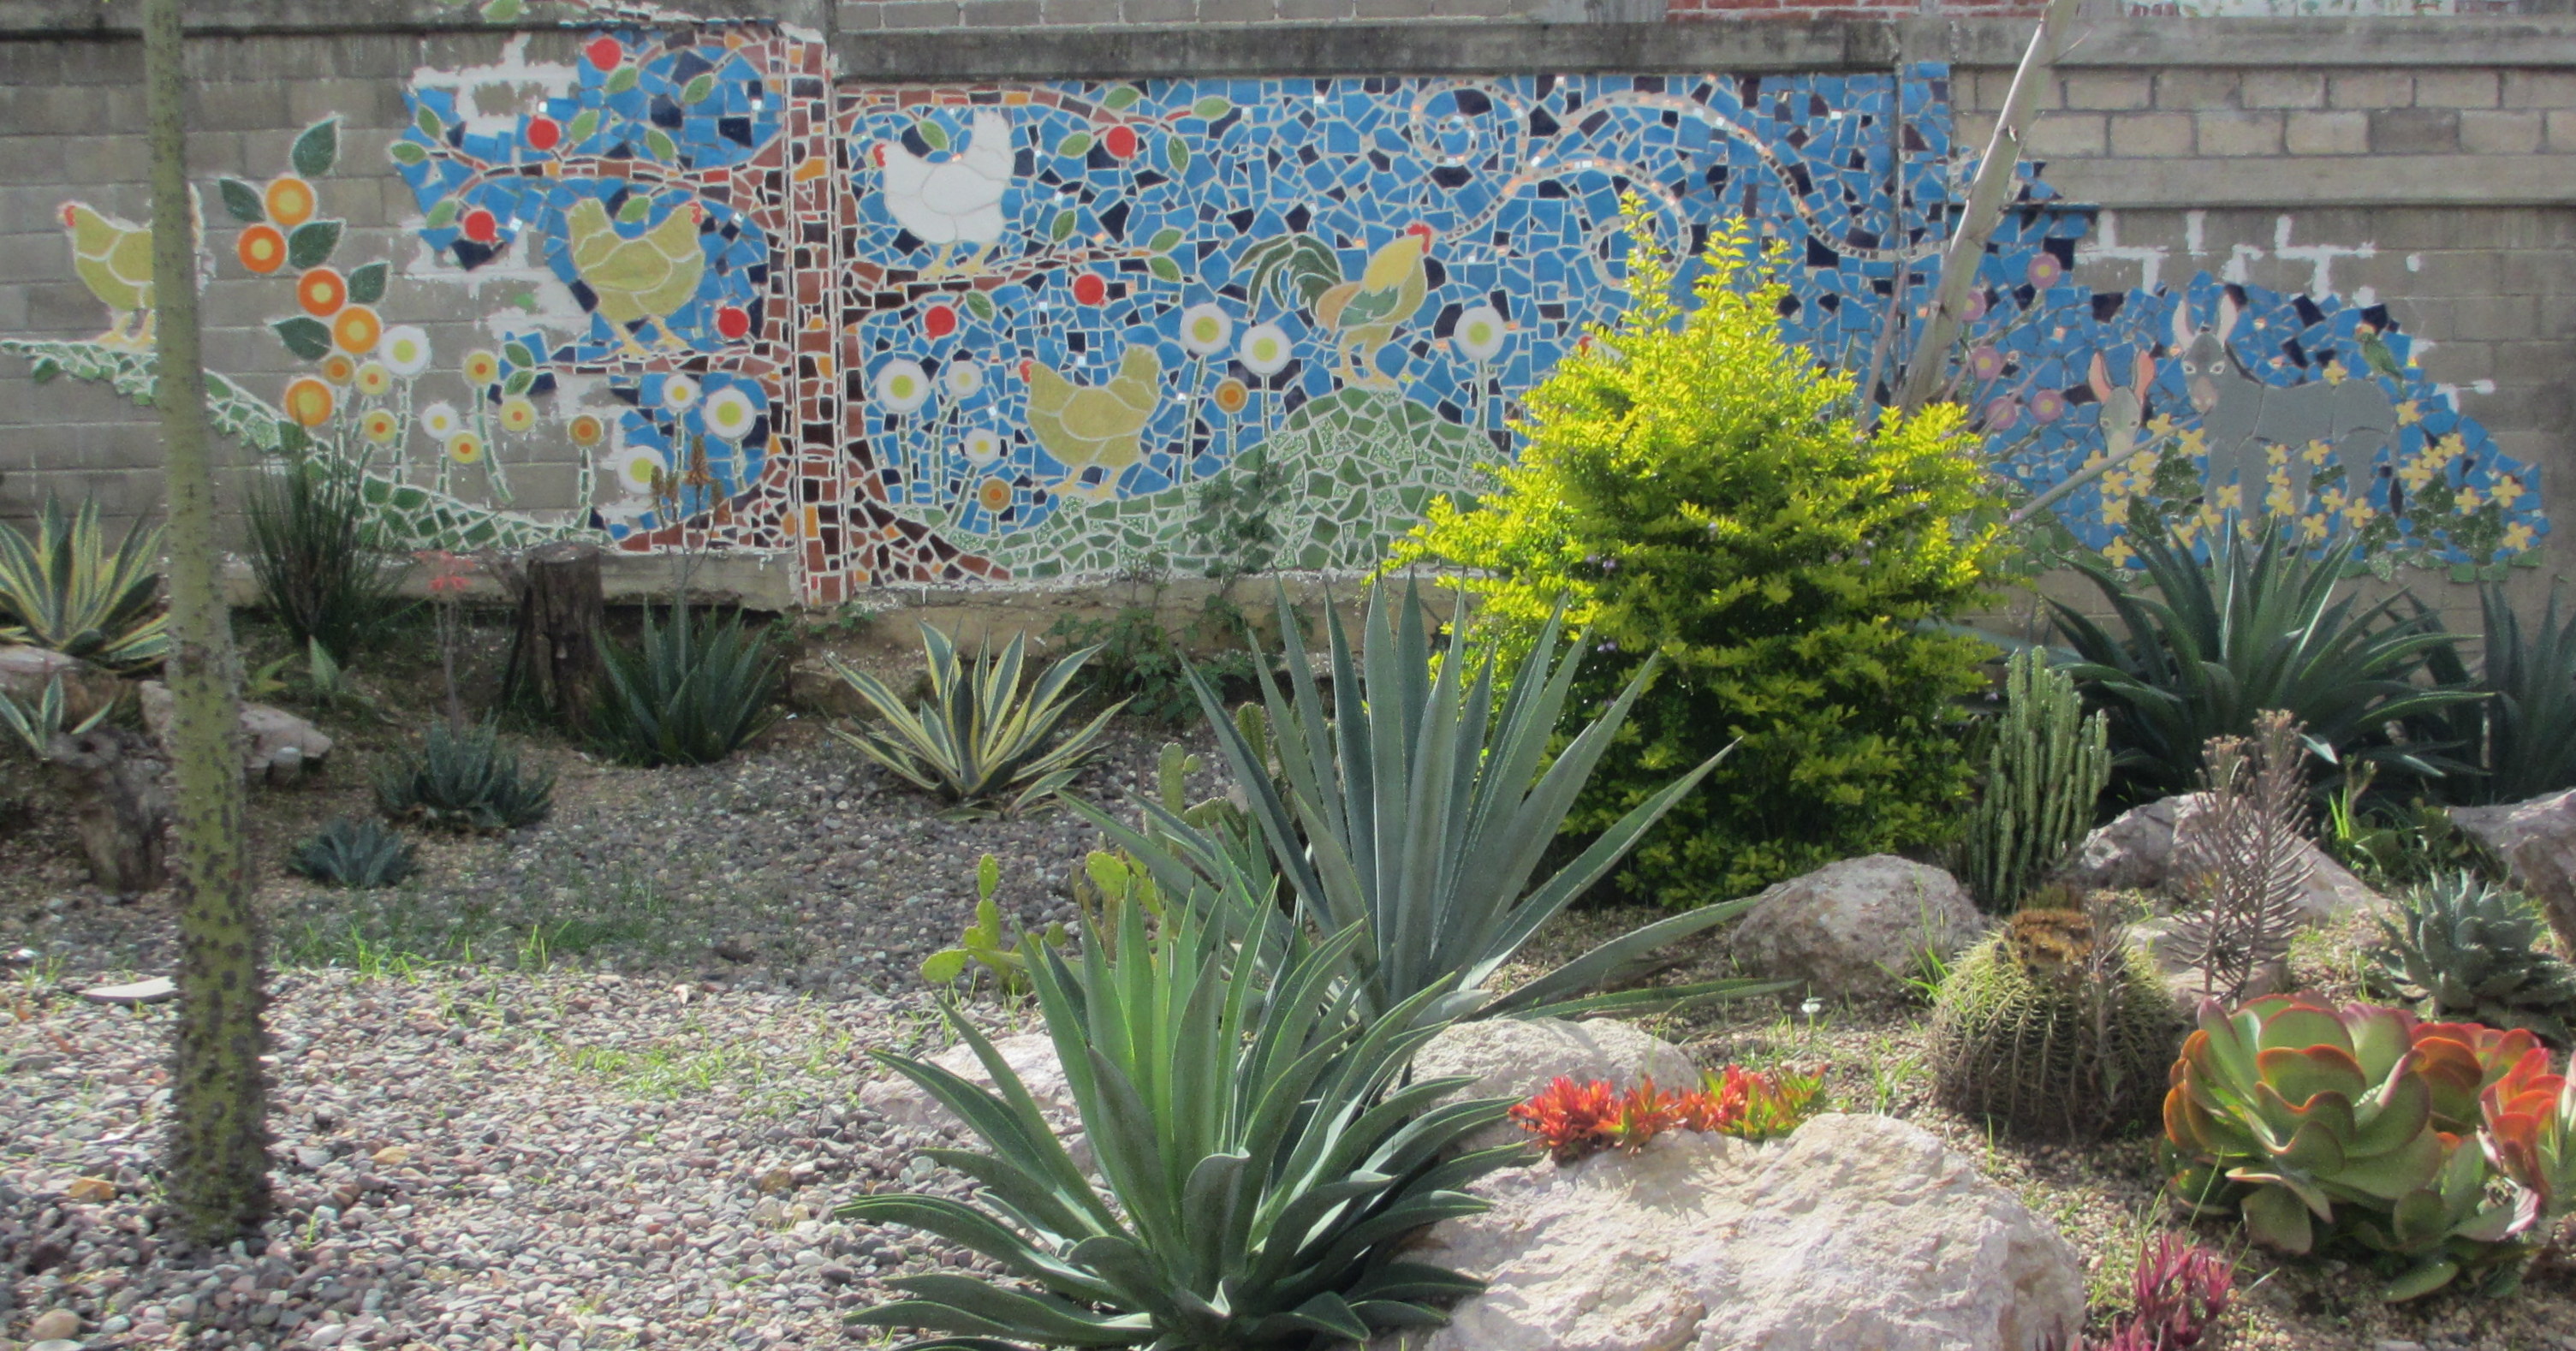 view of incomplete mosaic mural